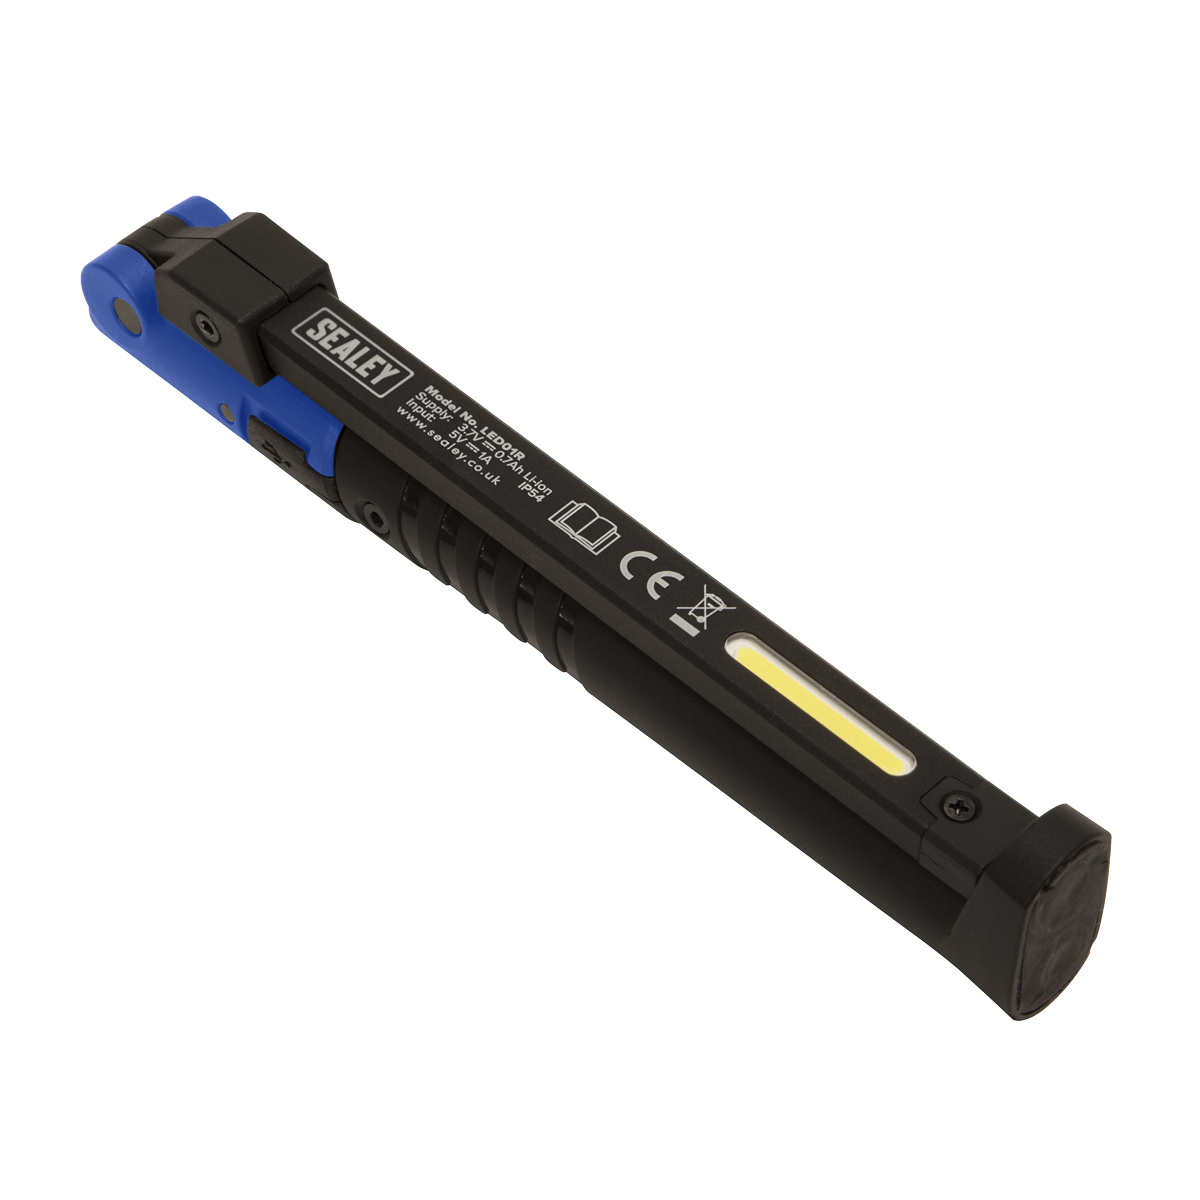 Sealey Rechargeable Torch Slim Fold in Blue LED01B | Super bright COB and SMD LED, 6000-7000k, 80 CRI. | toolforce.ie